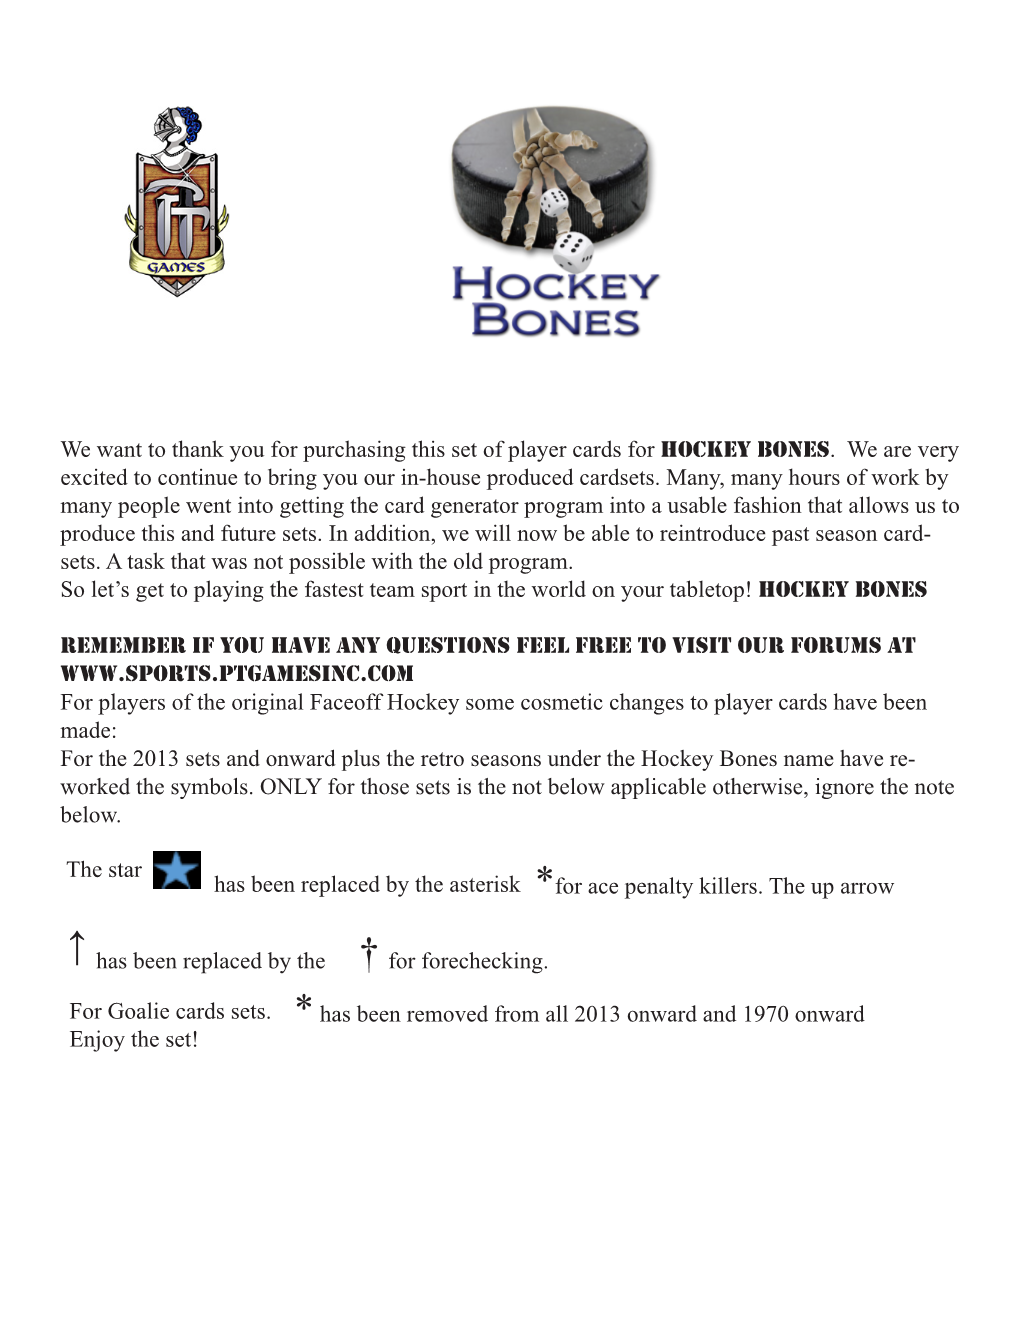 We Want to Thank You for Purchasing This Set of Player Cards for Hockey Bones